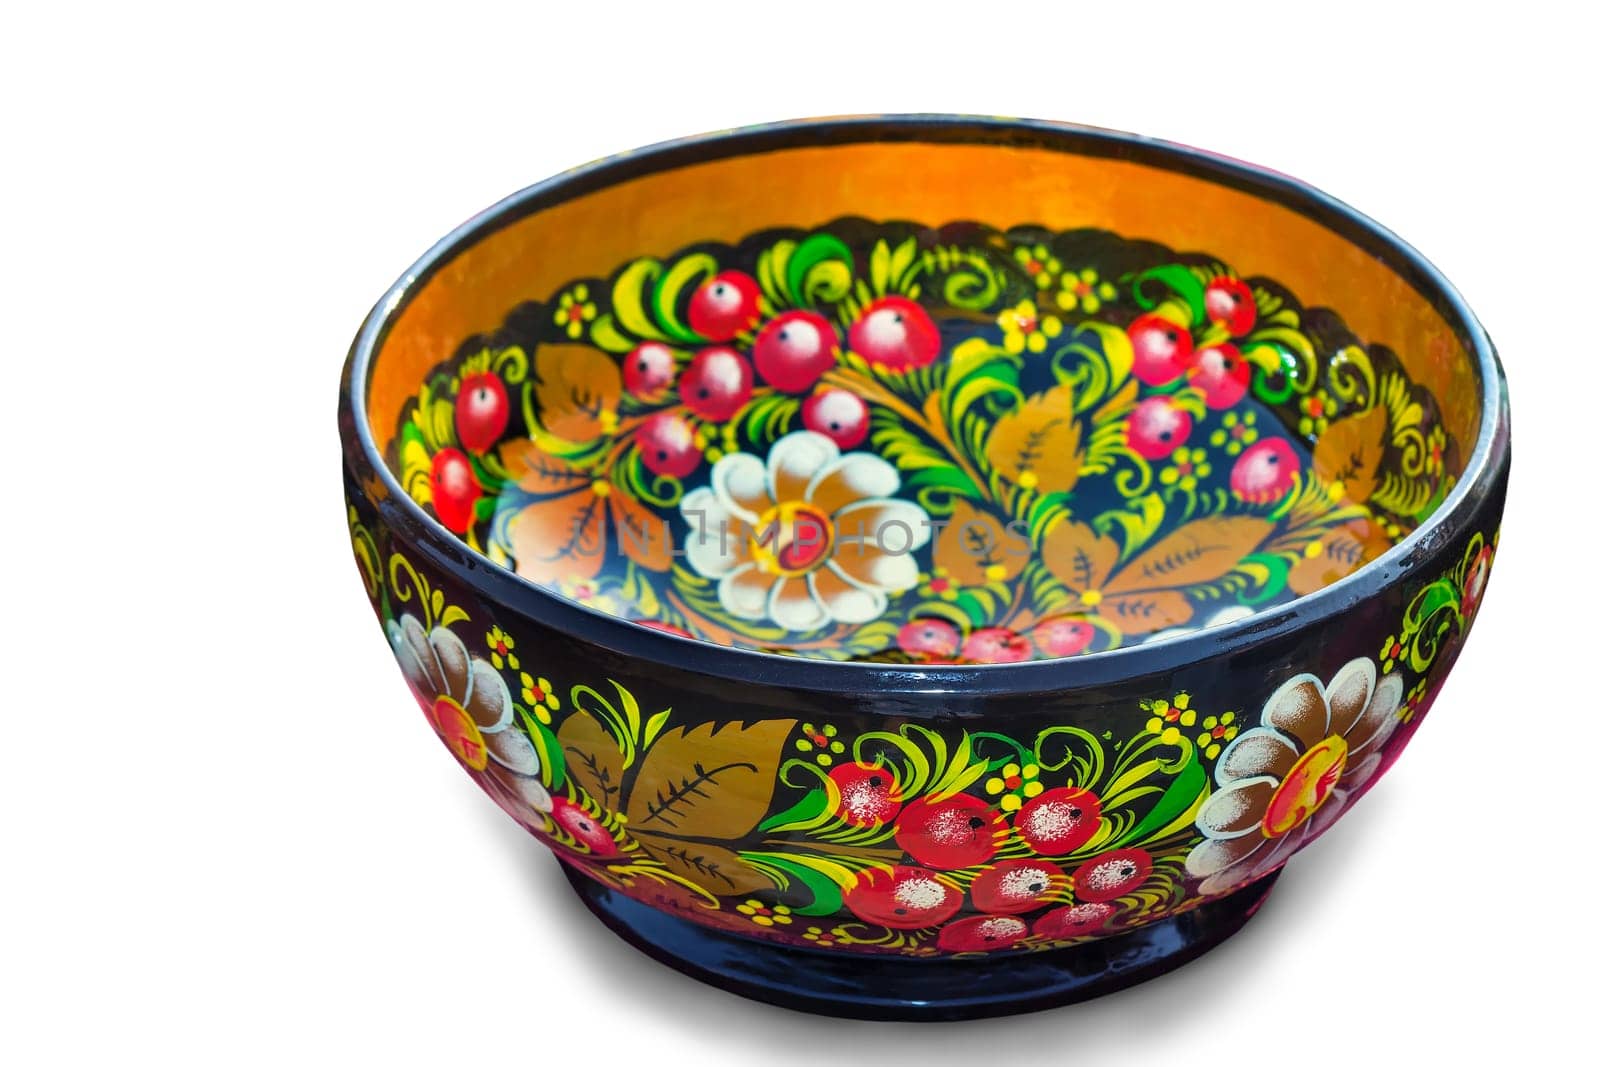 Wooden bowl with beautiful paintings in a traditional style , handmade. Presented on a white background.